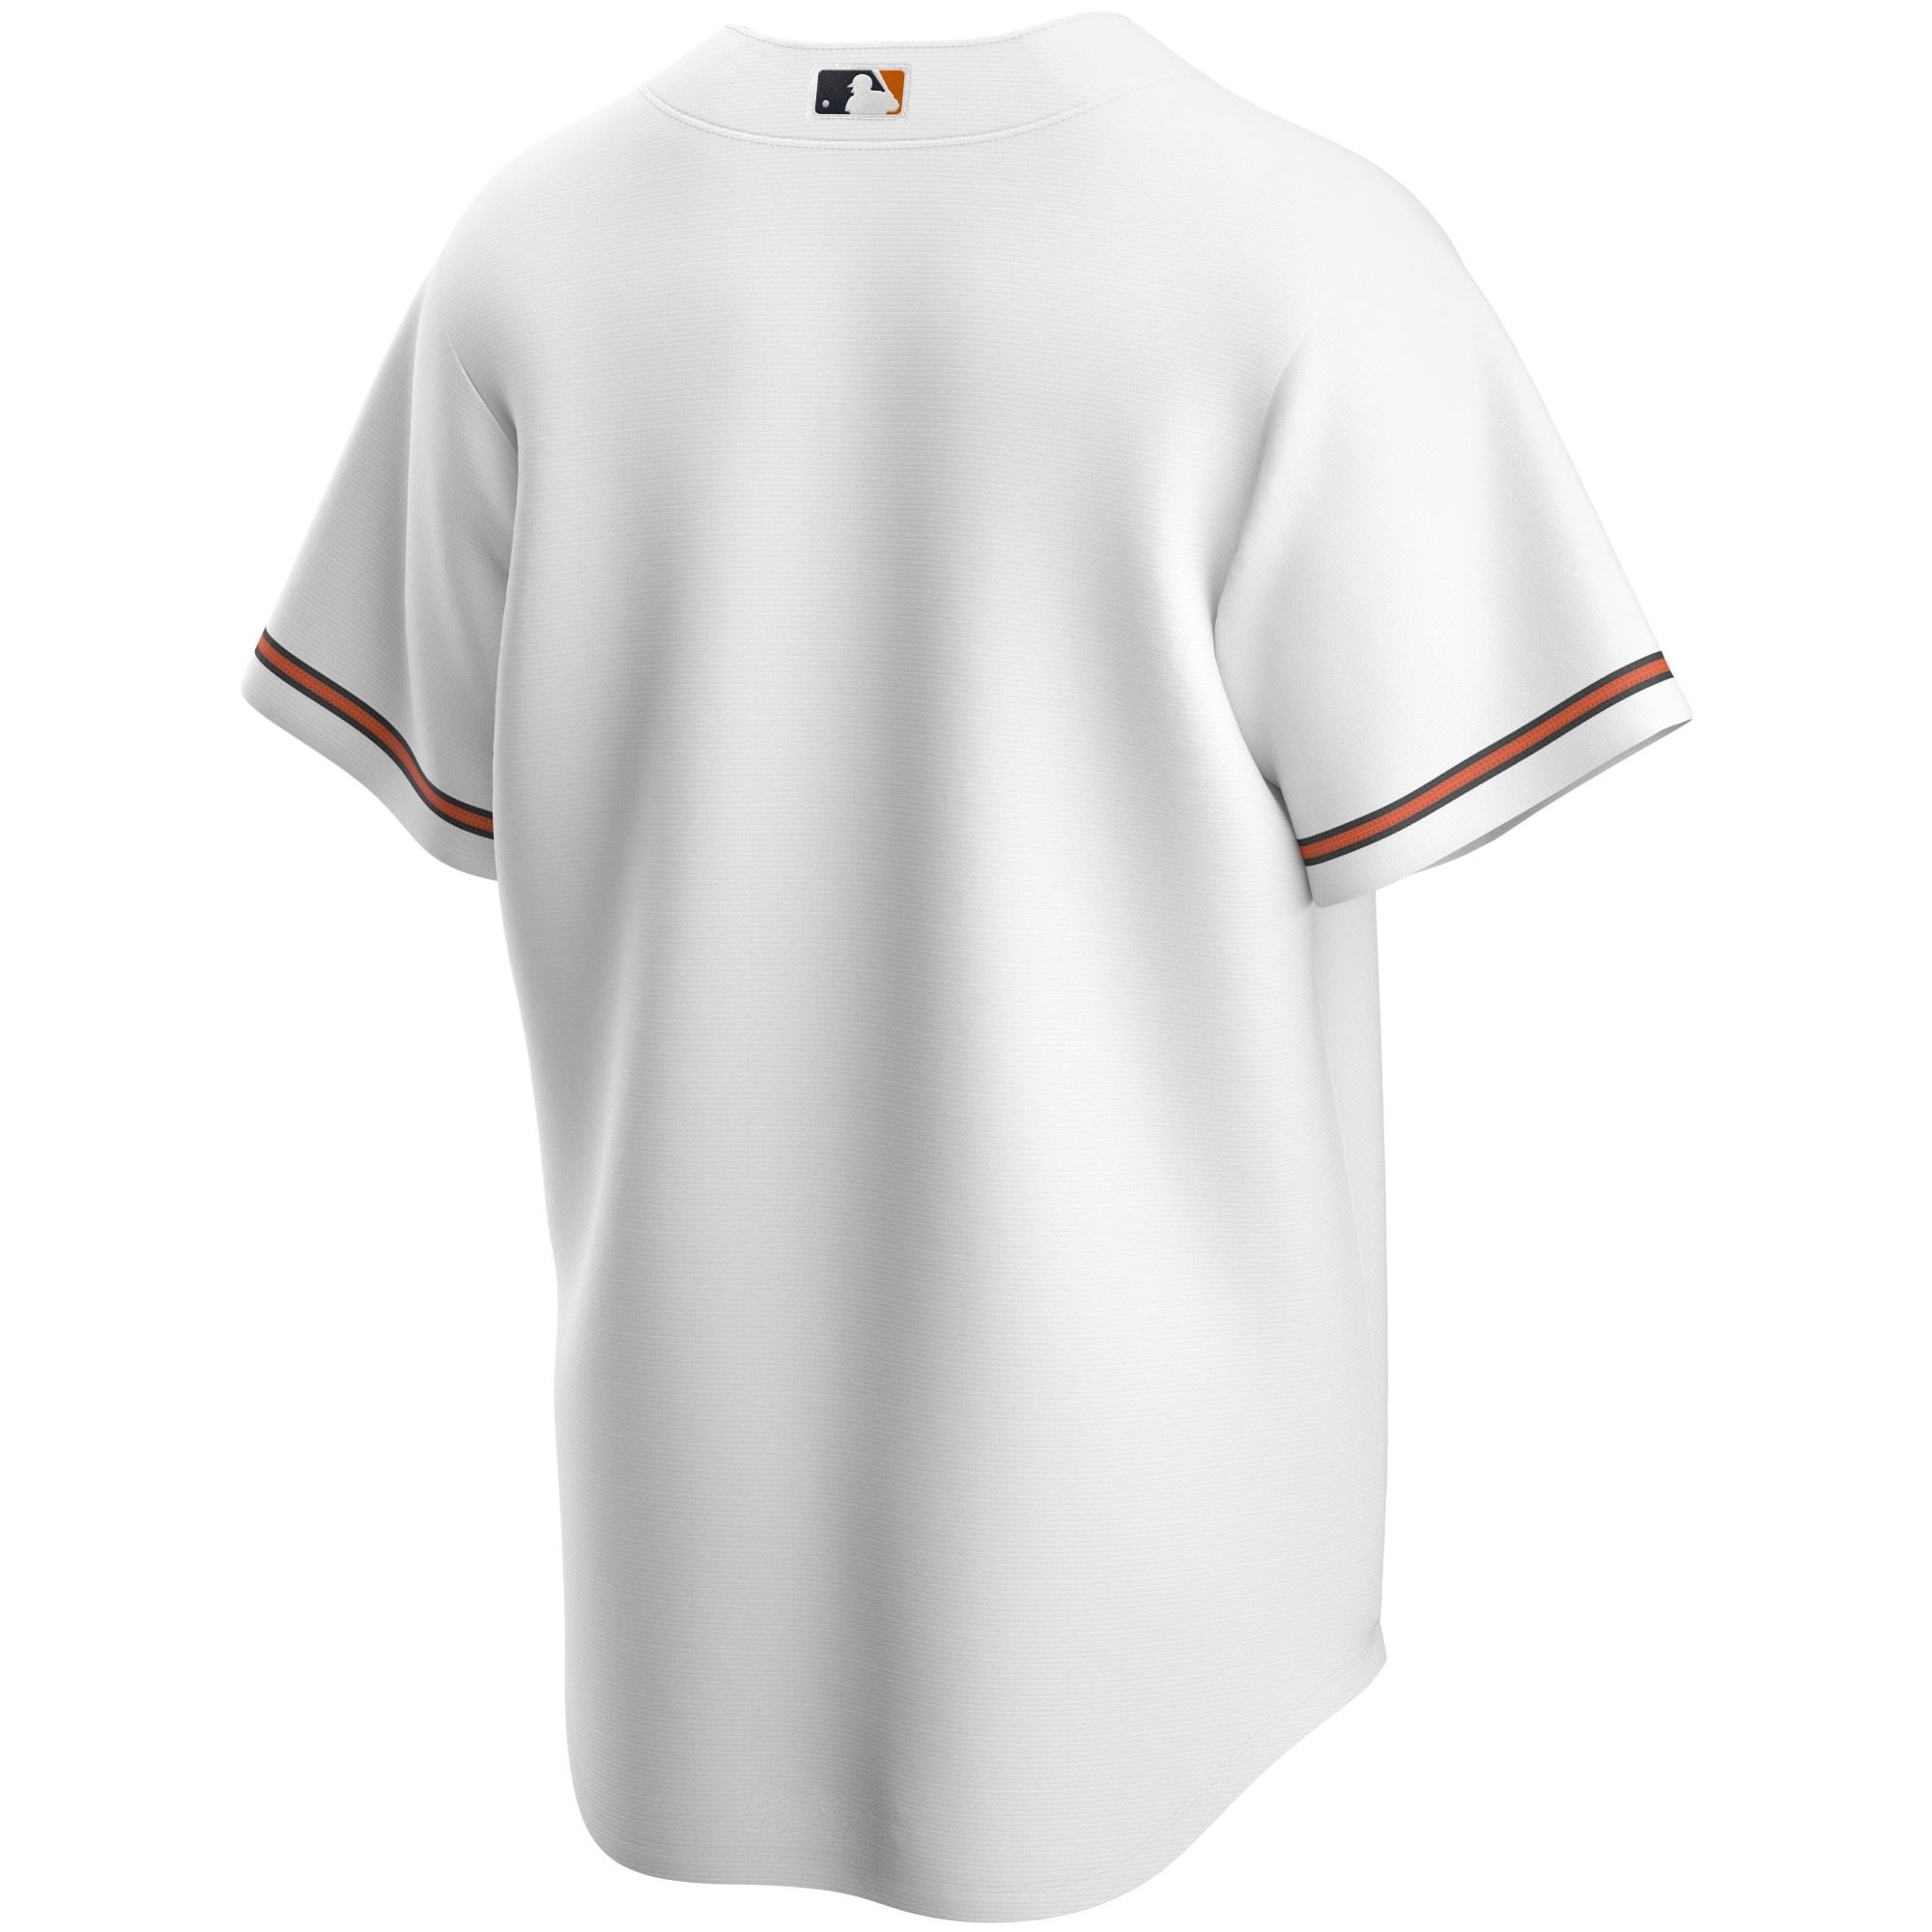 Baltimore Orioles Official MLB Replica Home Jersey White Nike